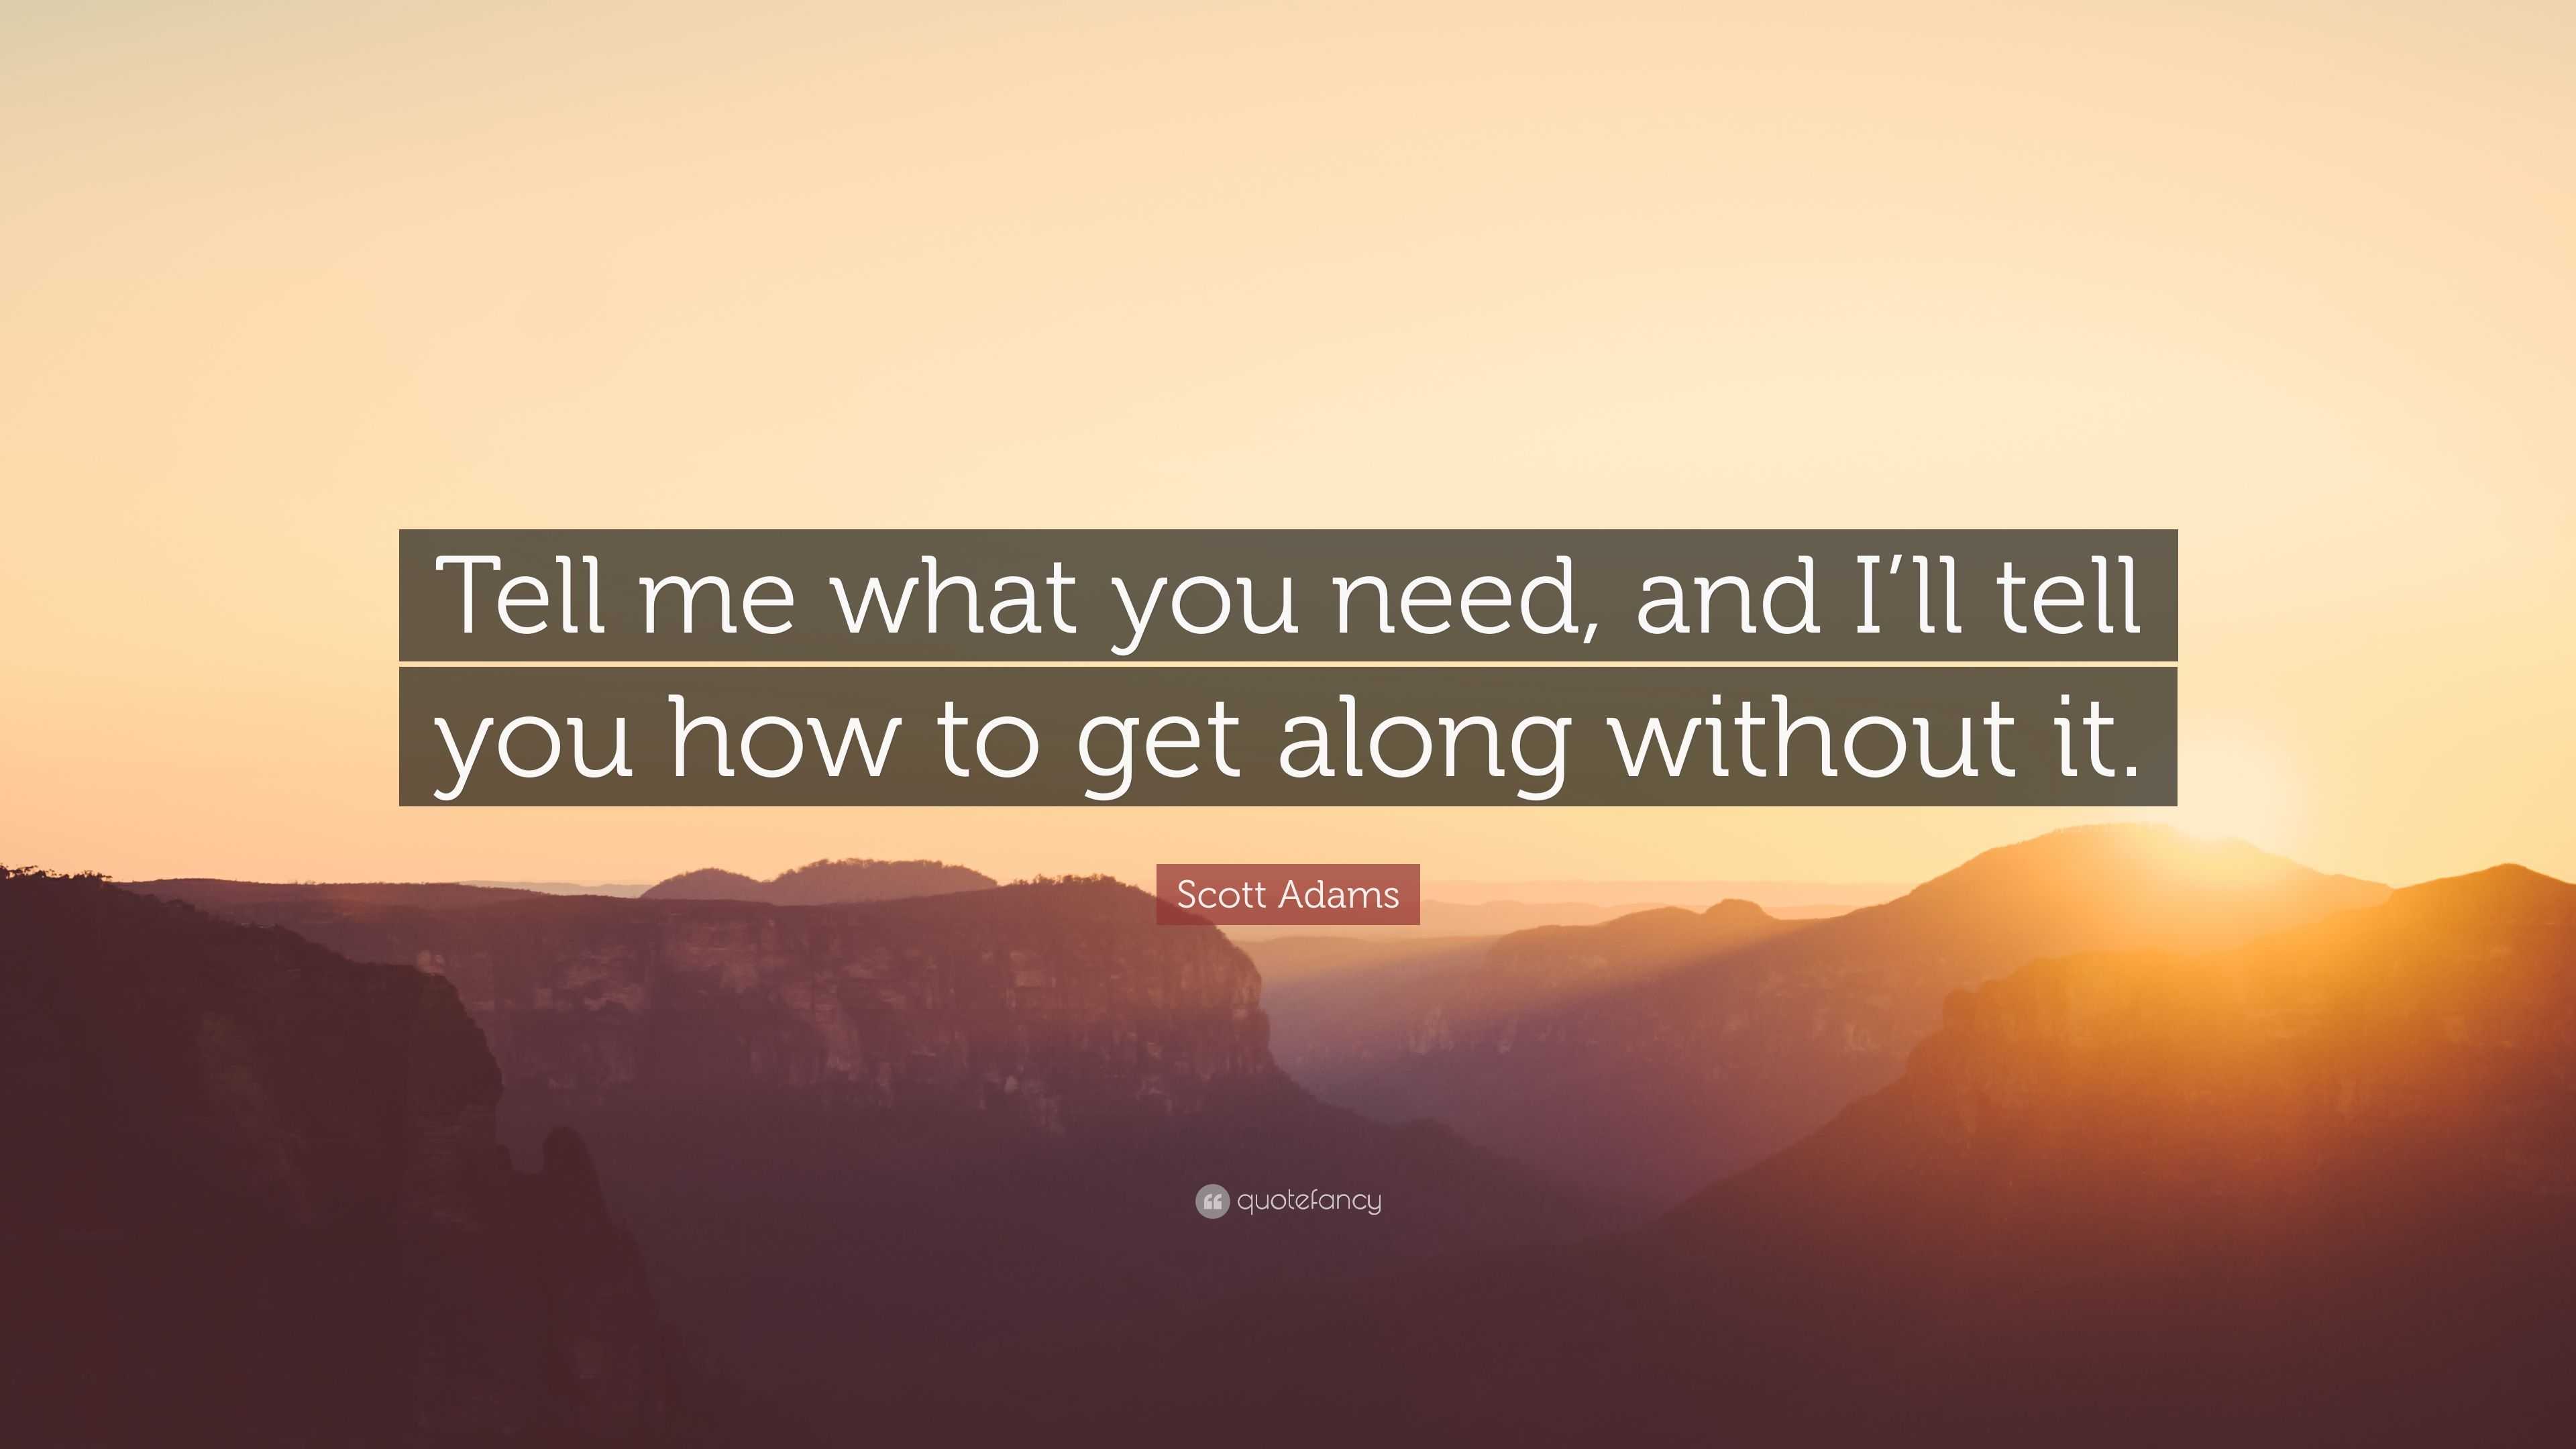 Scott Adams Quote: “Tell me what you need, and I’ll tell you how to get ...